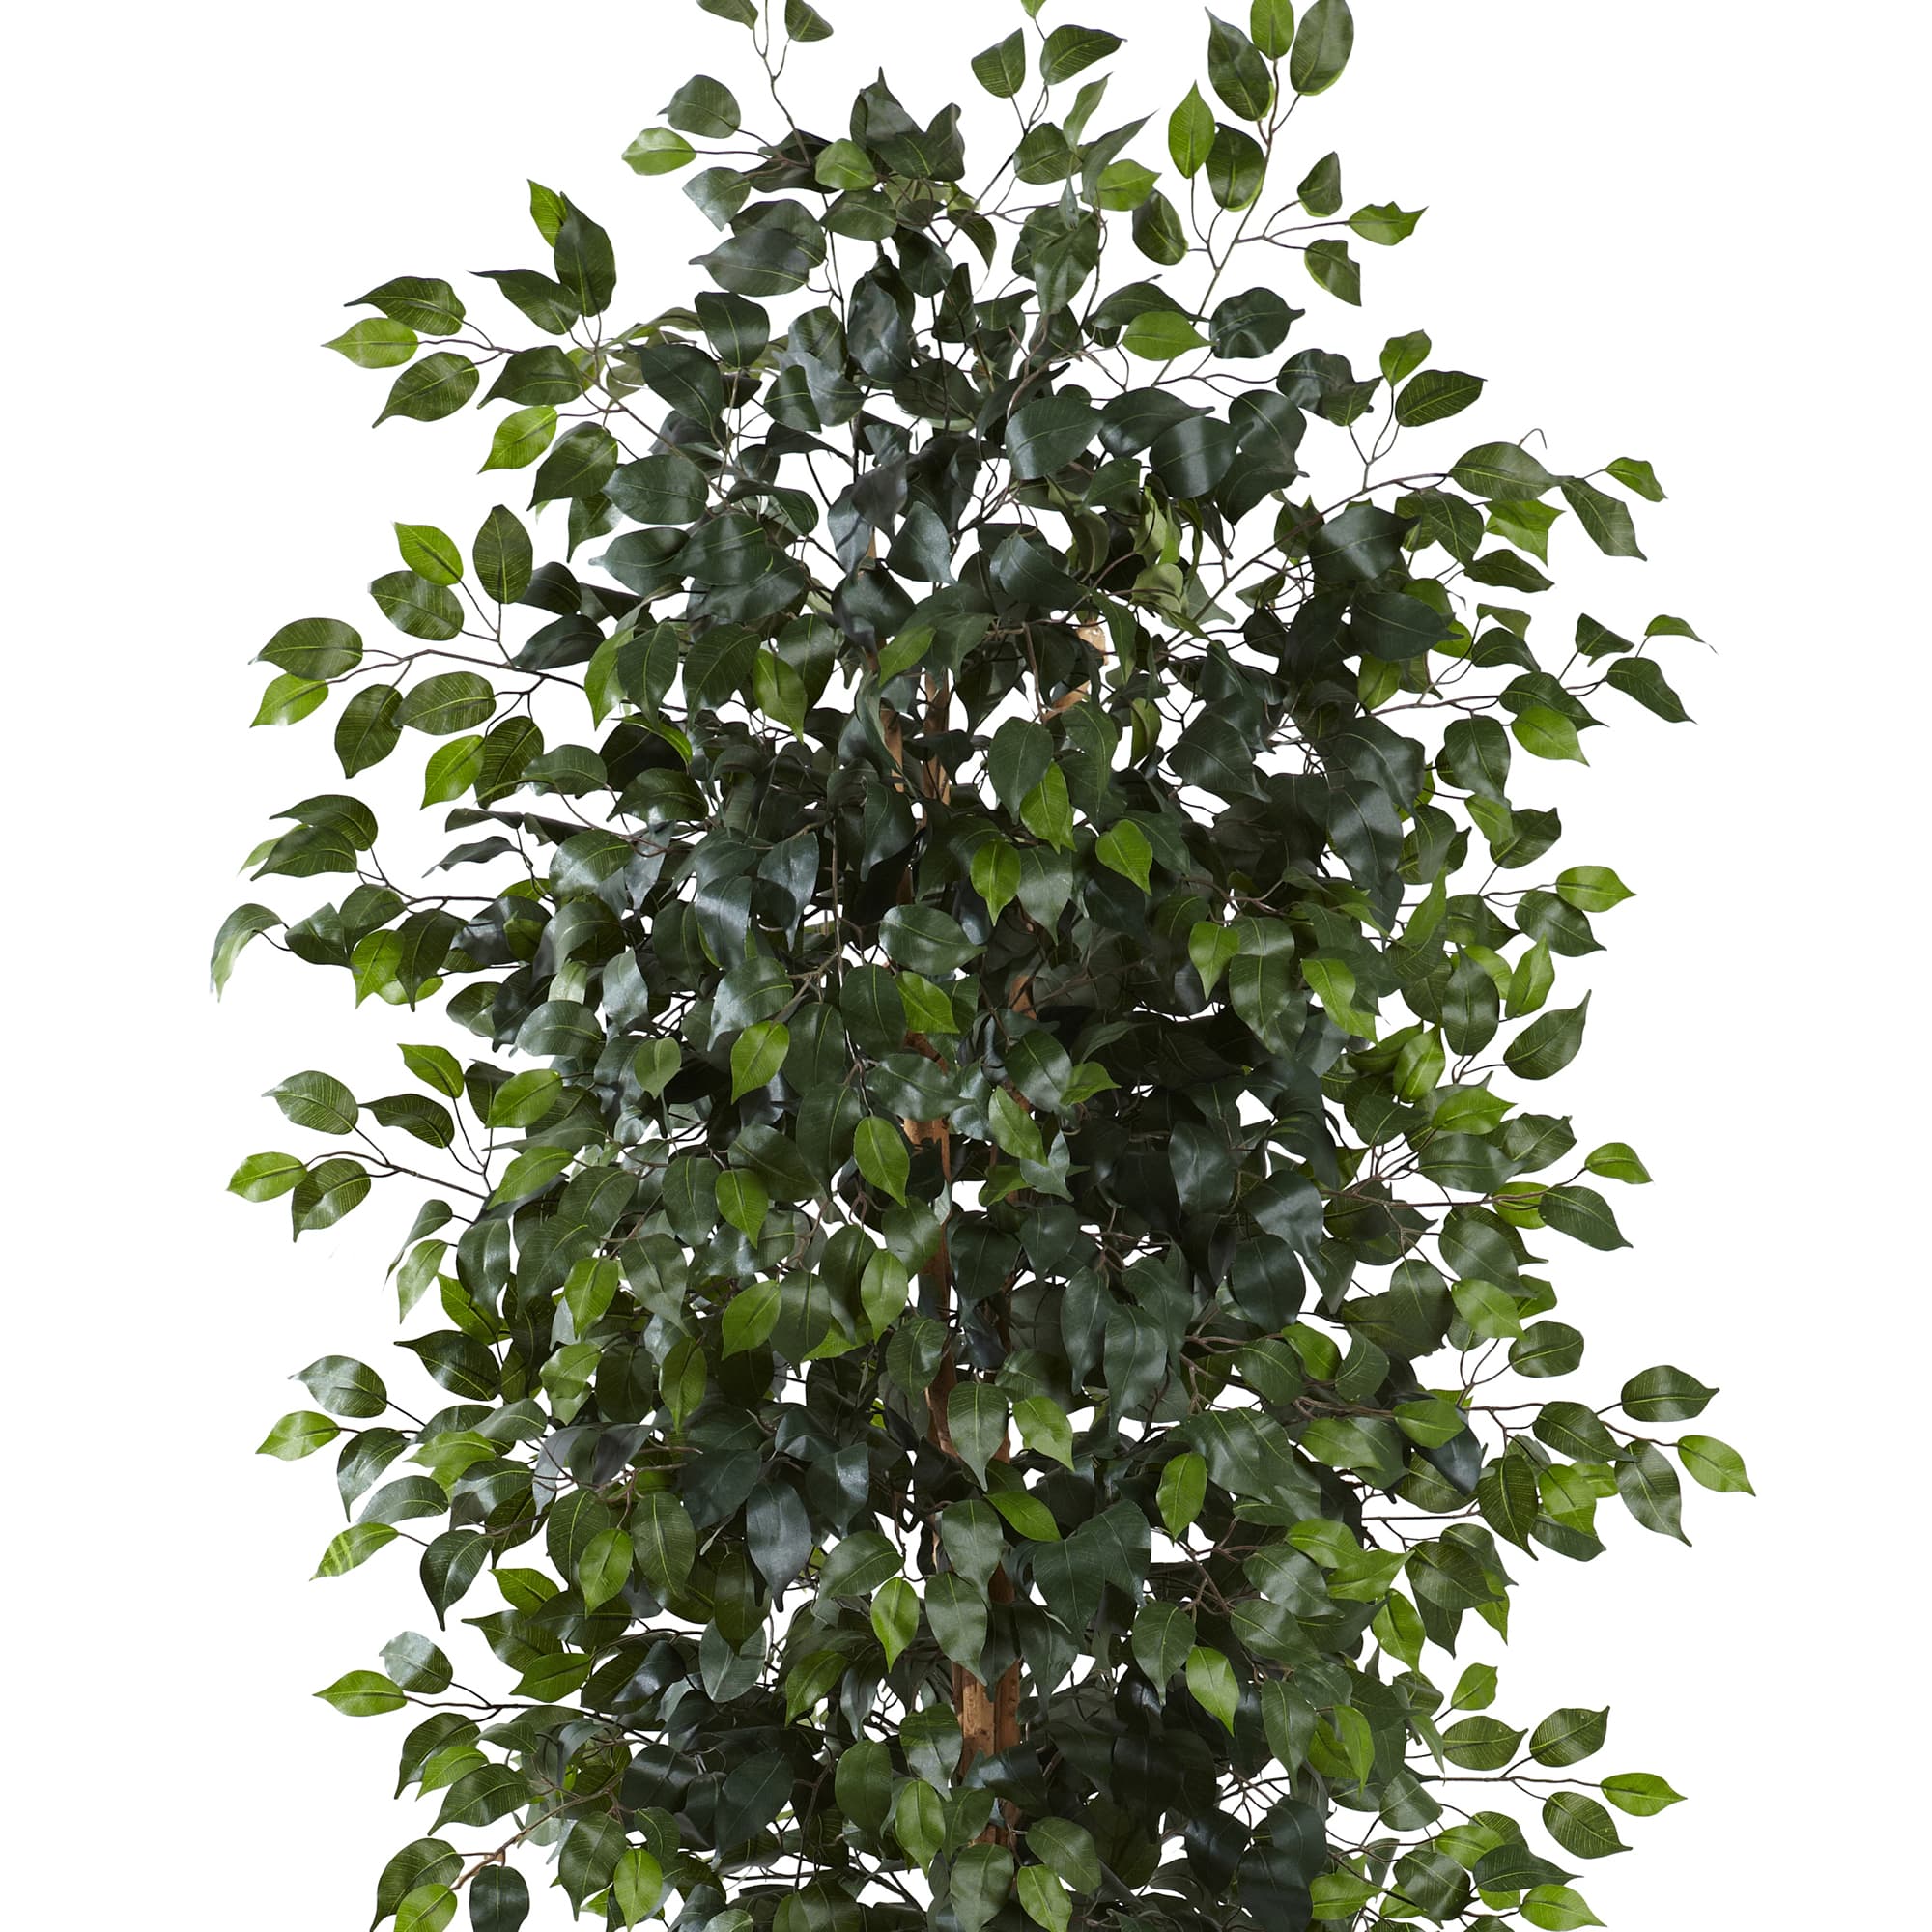 8ft. Potted Ficus Tree